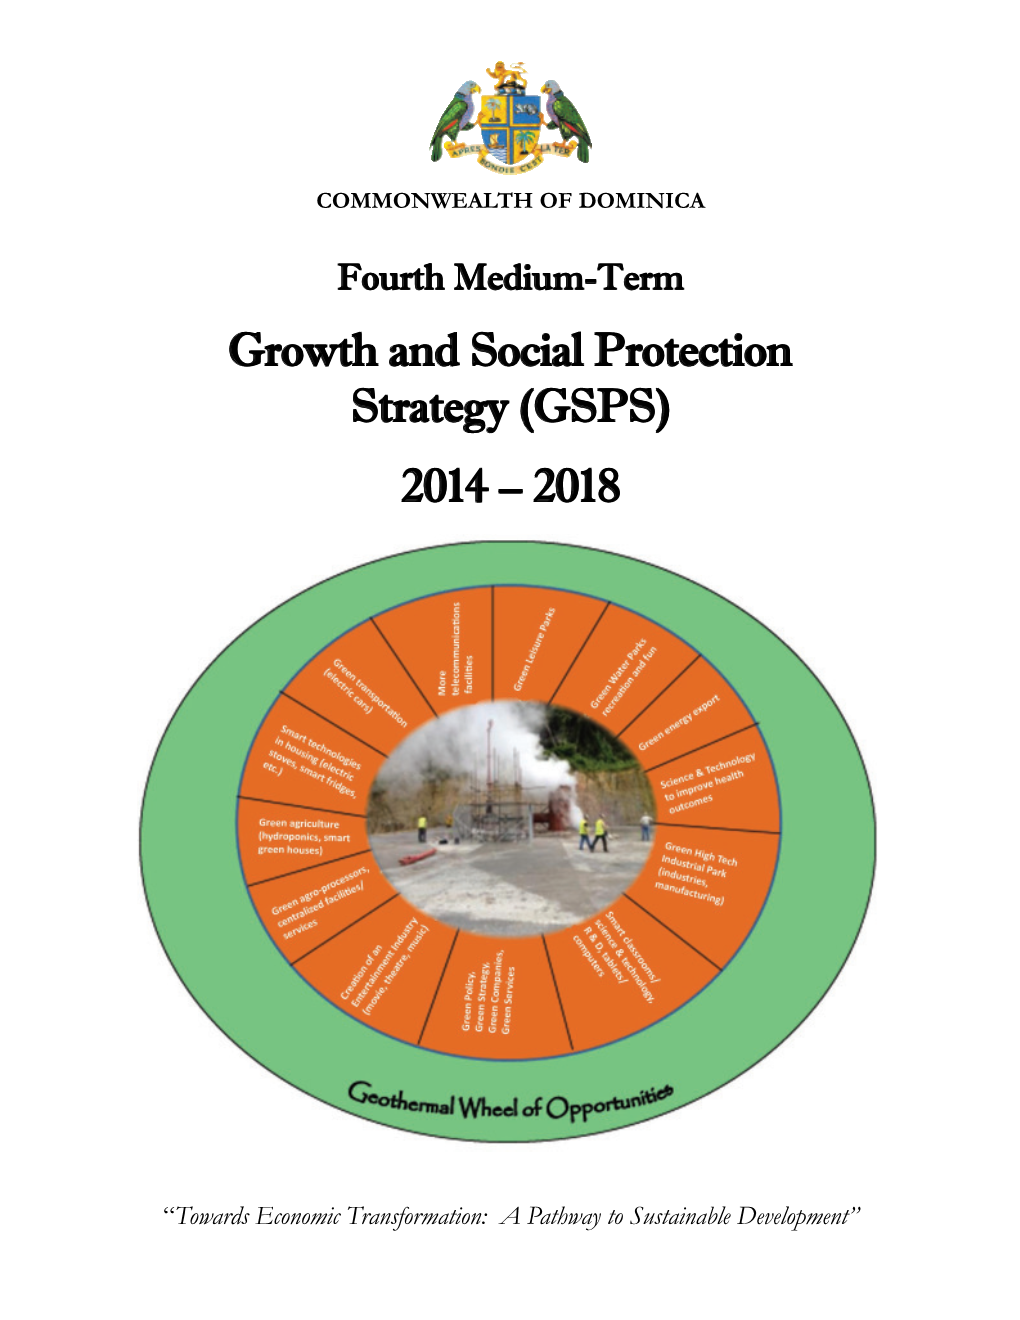 Fourth Medium-Term Growth and Social Protection Strategy (GSPS) 2014 – 2018